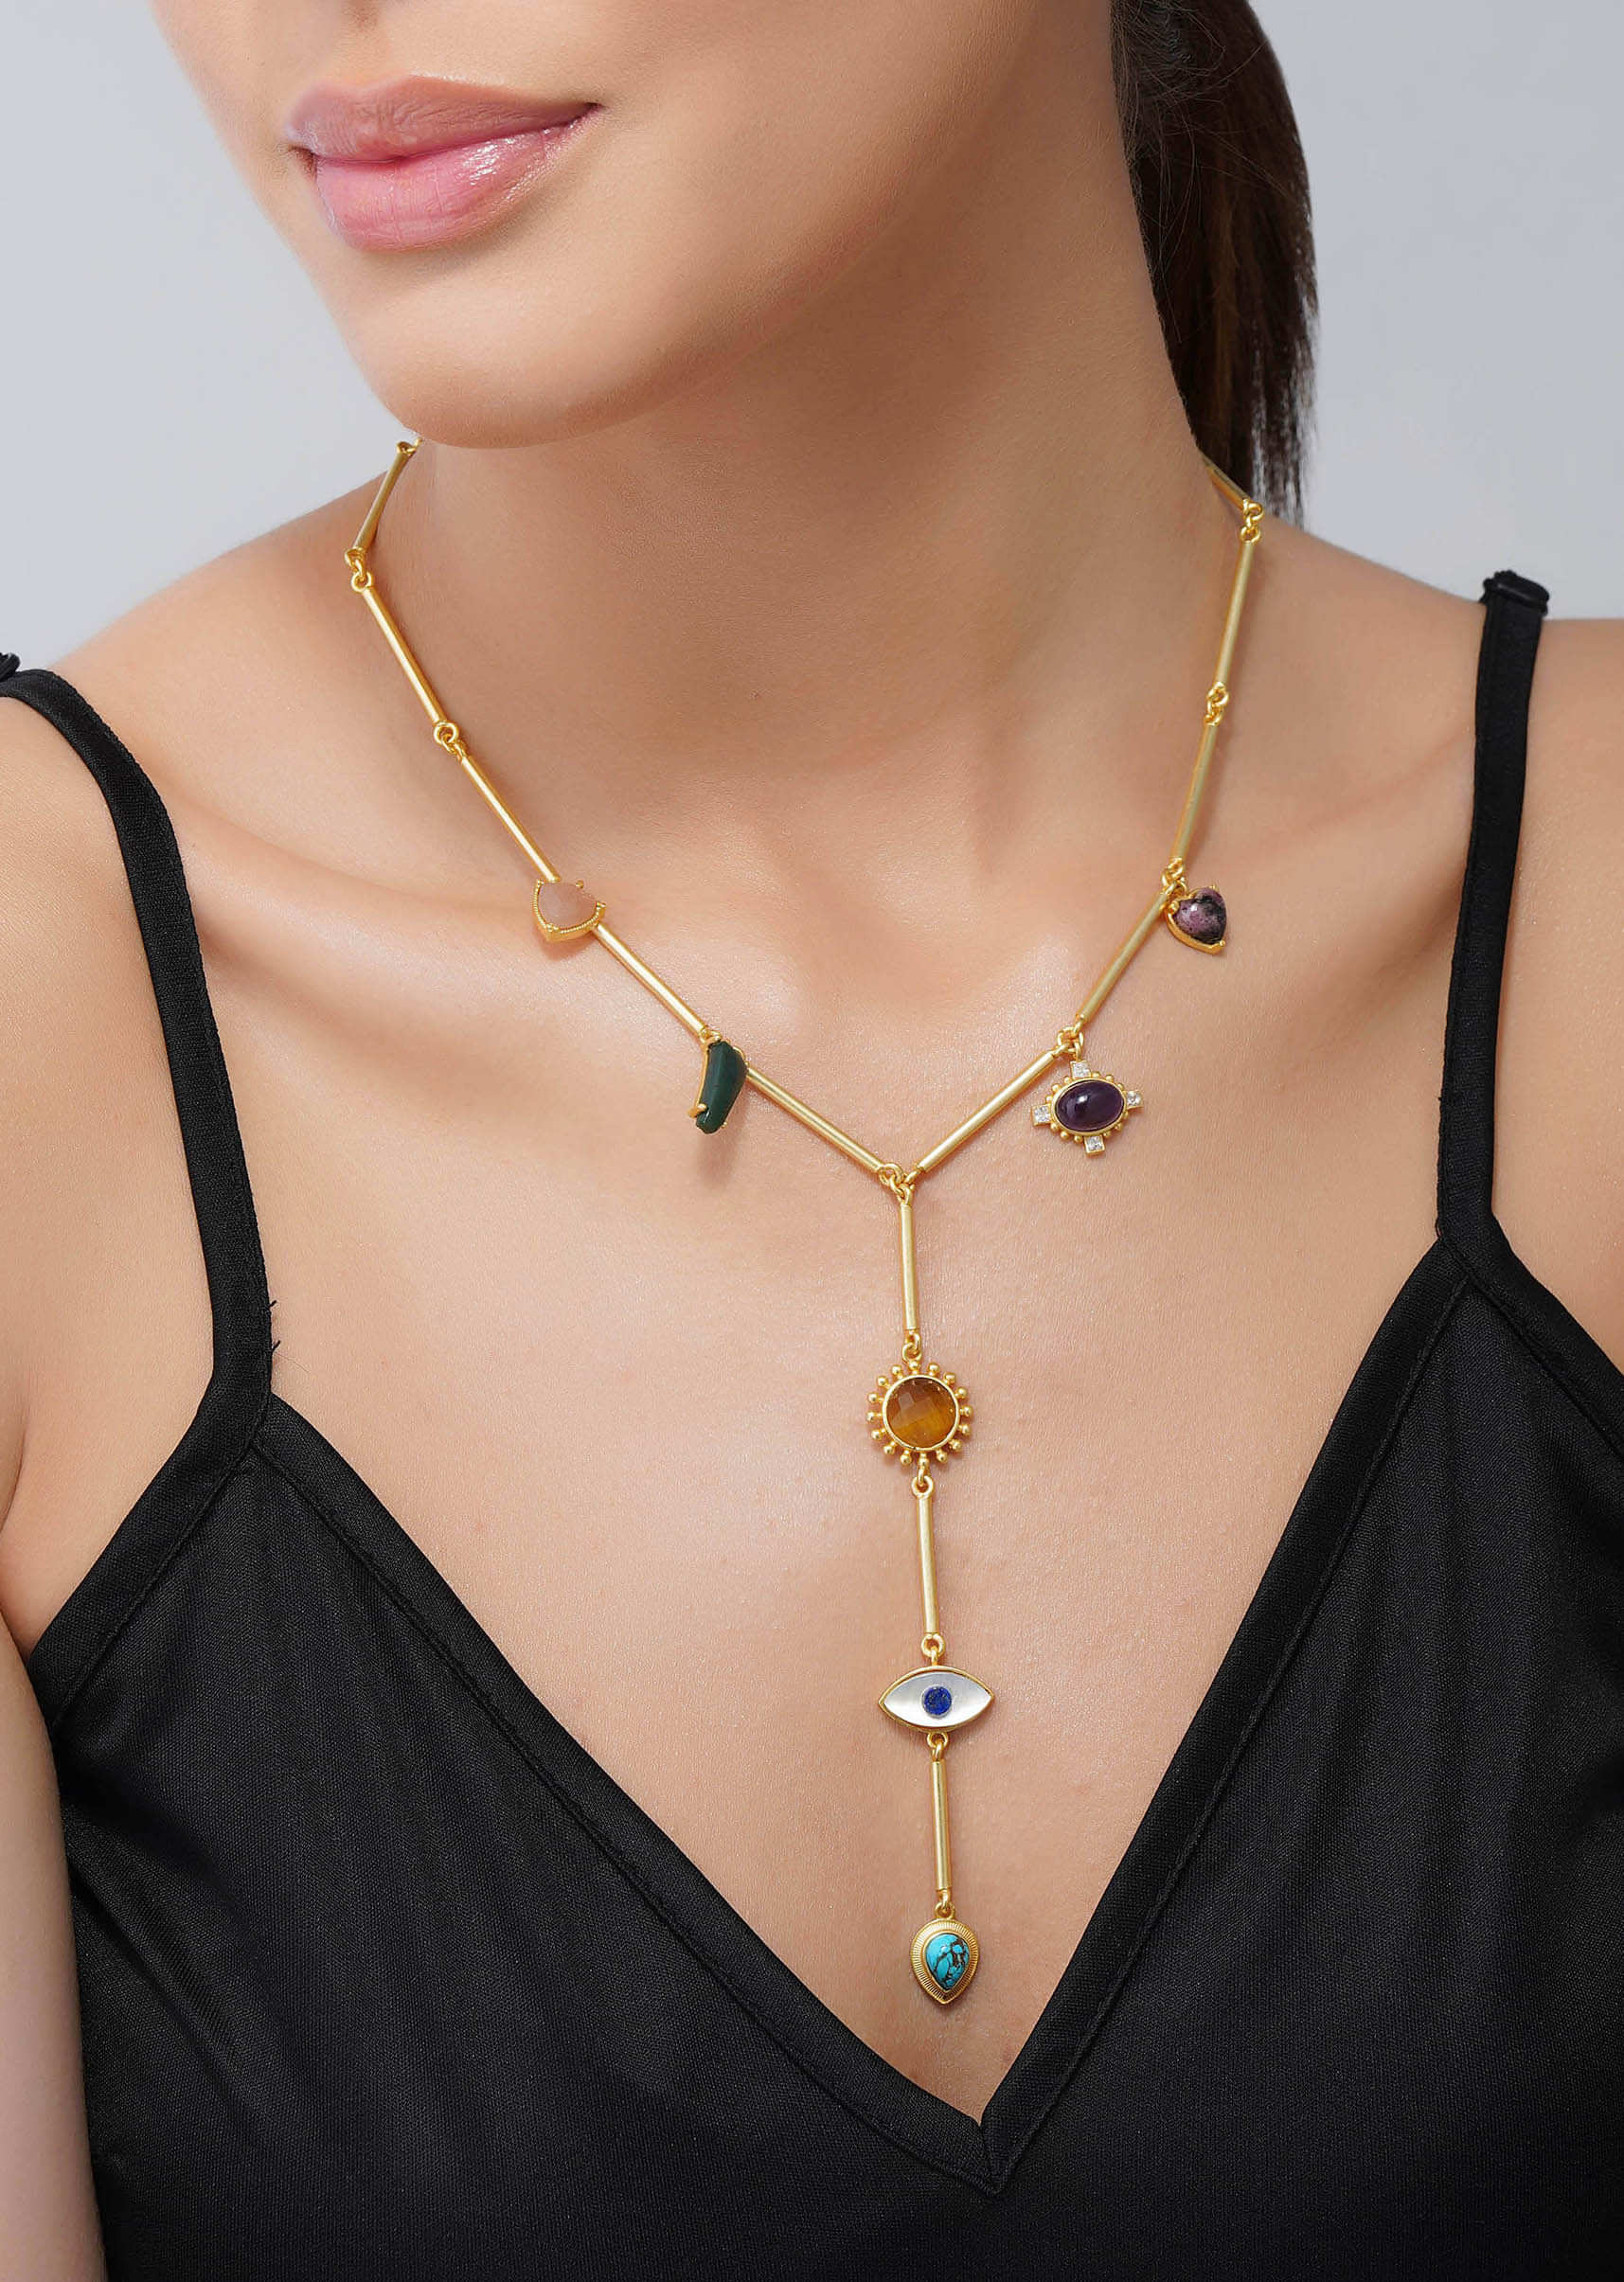 22Kt Gold Plated Multi Colored Healing Stone Lariat Necklace